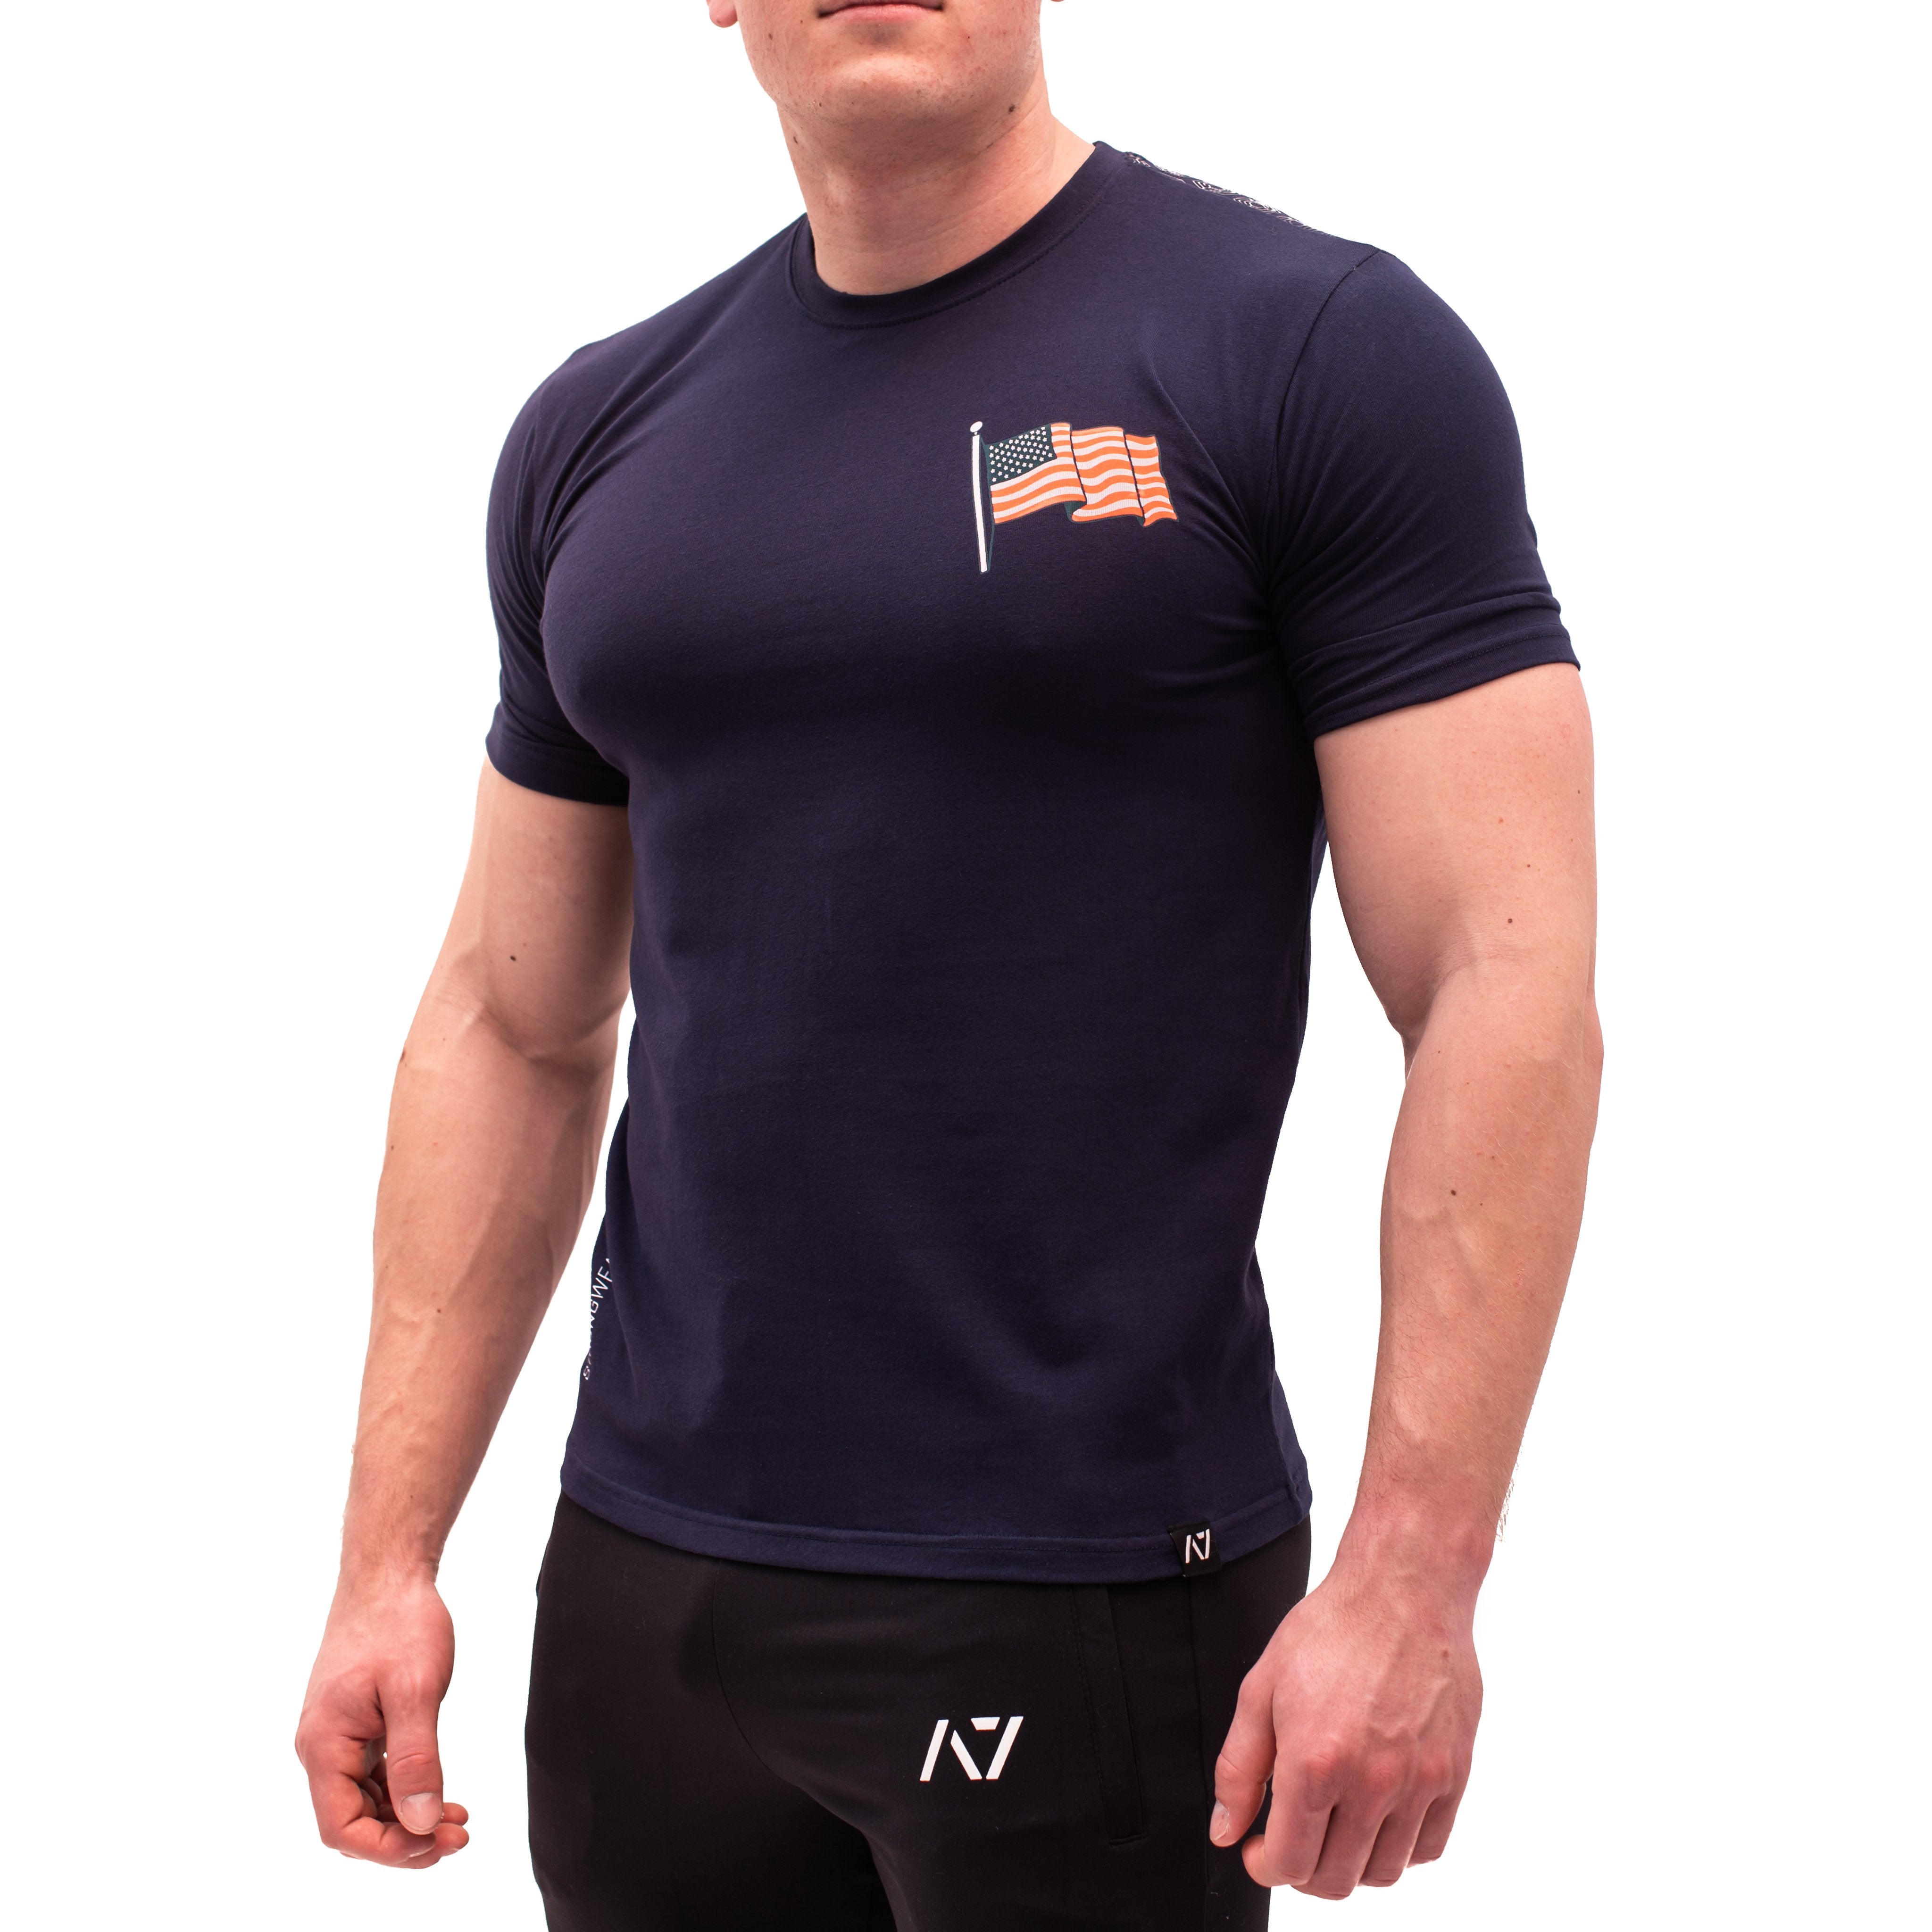 Patriot Wave Bar Grip T-shirt, great as a squat shirt. Purchase Stealth Bar Grip tshirt UK from A7 UK. Purchase Patriot Wave Bar Grip Shirt Europe from A7 UK. No more chalk and no more sliding. Best Bar Grip Tshirts, shipping to UK and Europe from A7 UK. The best Powerlifting apparel for all your workouts. Available in UK and Europe including France, Italy, Germany, Sweden and Poland